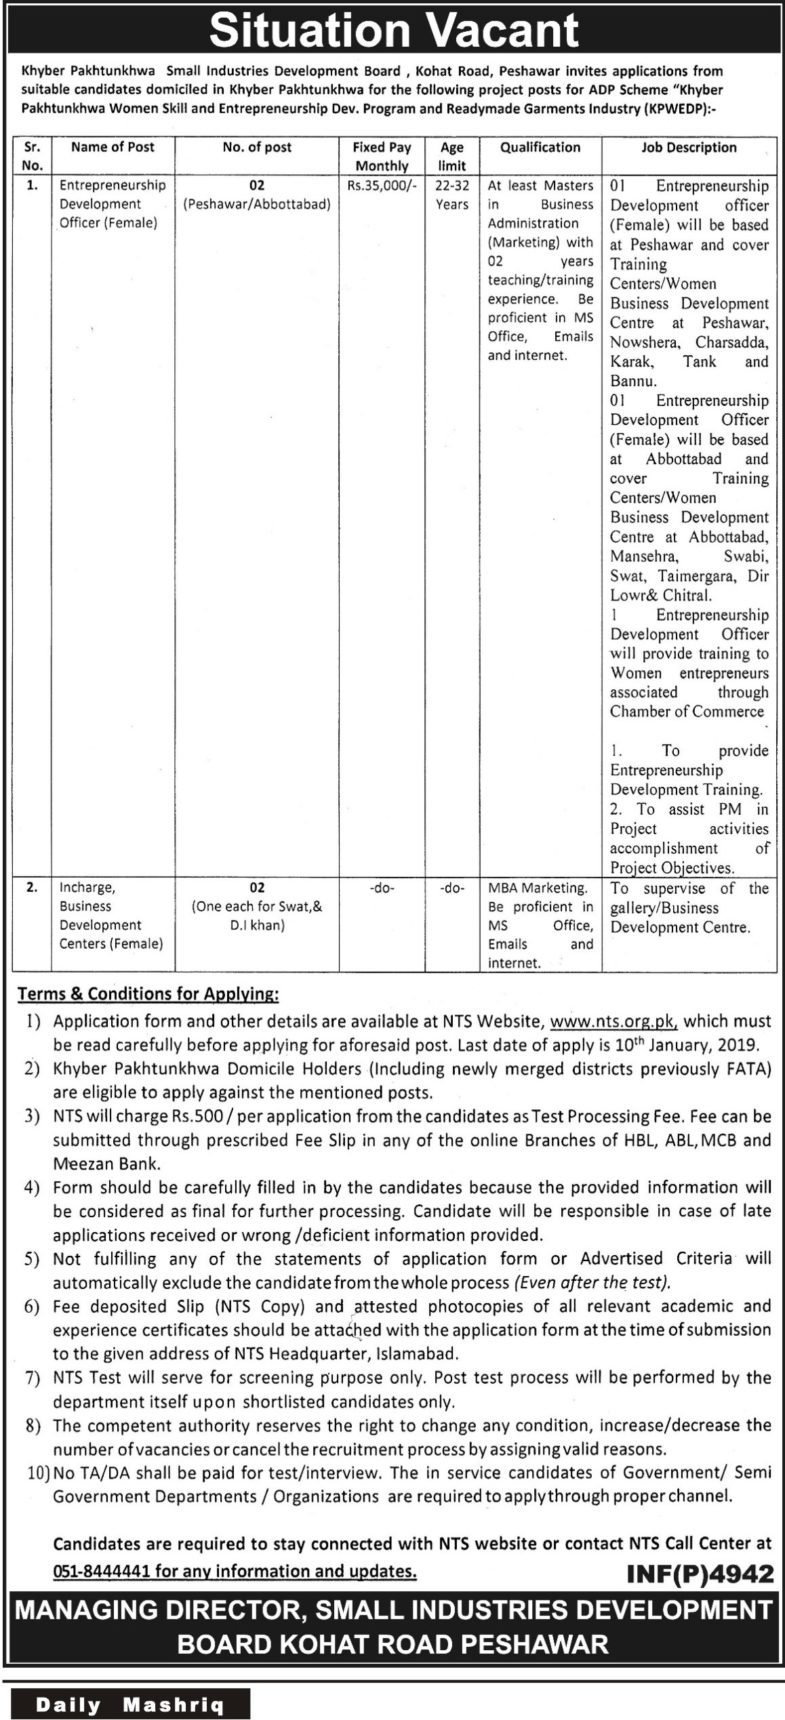 KP Small Industries Development Board Jobs 2019 for 4+ Entrepreneurship Development Officers and Incharge